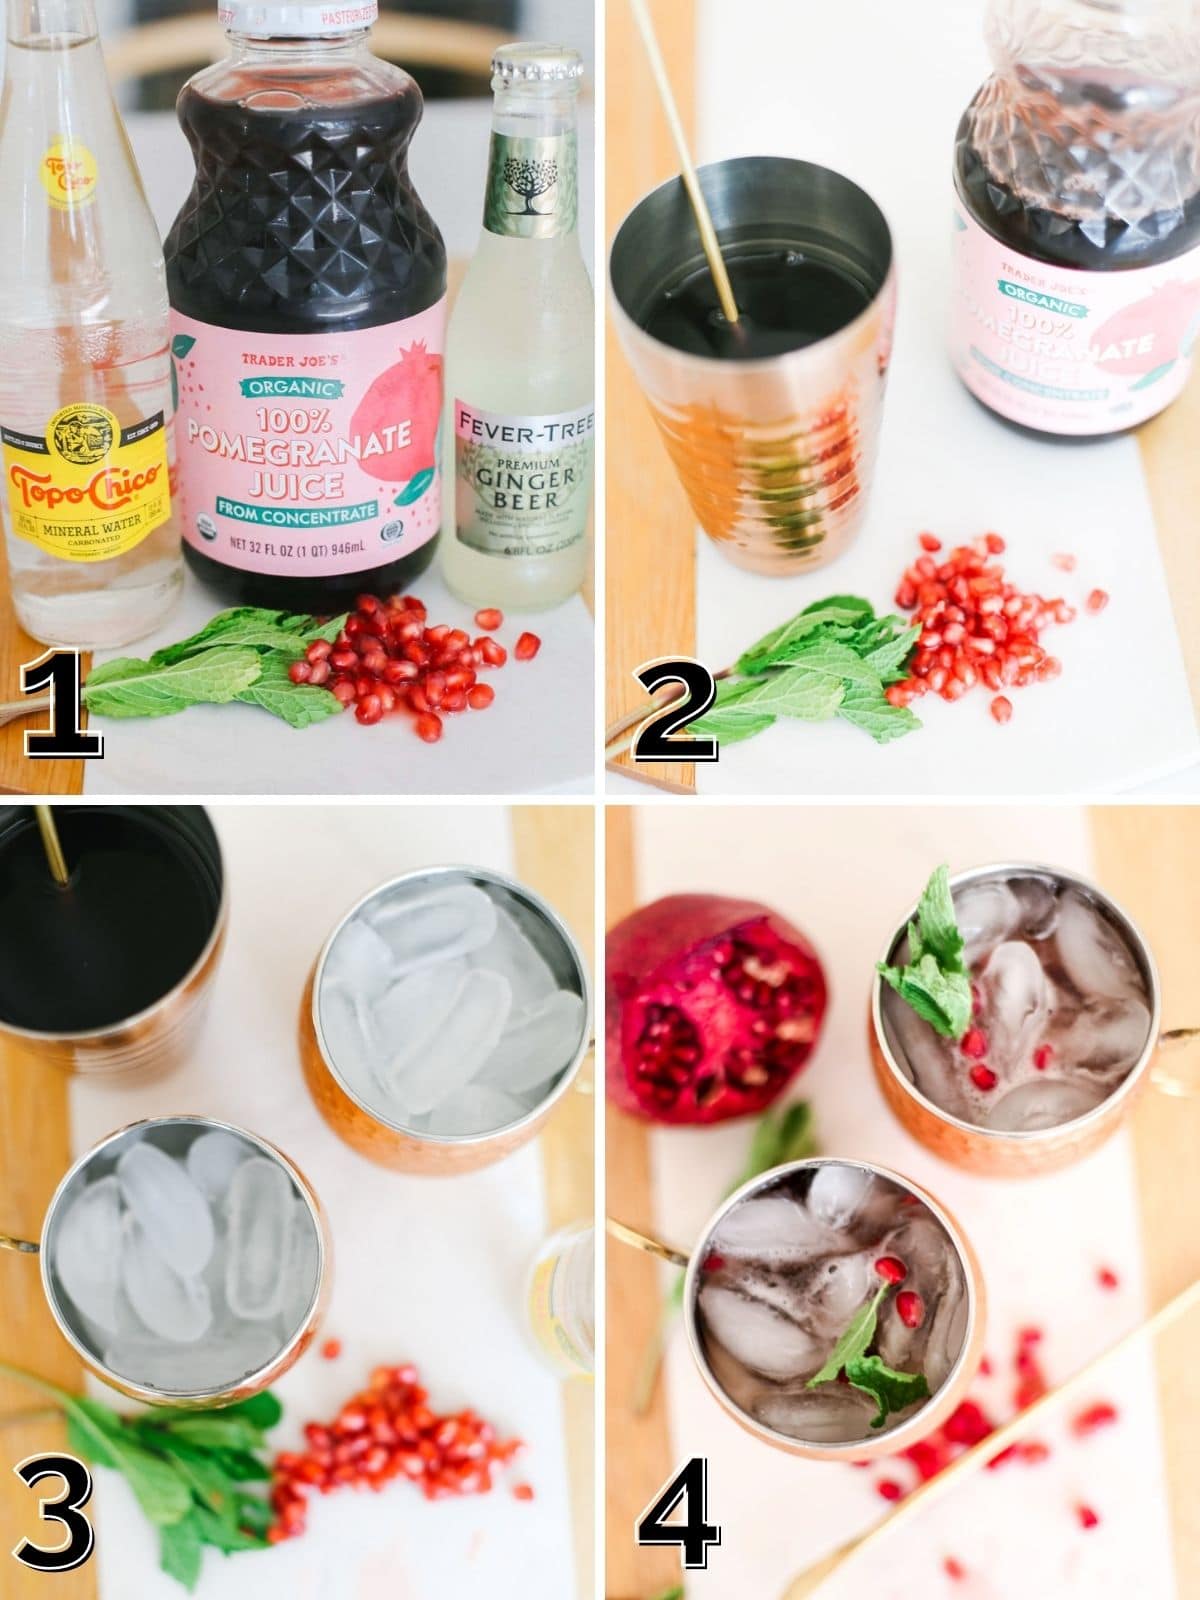 A step by step process for making mojito mocktails from adding juice and mint to pouring into glasses.